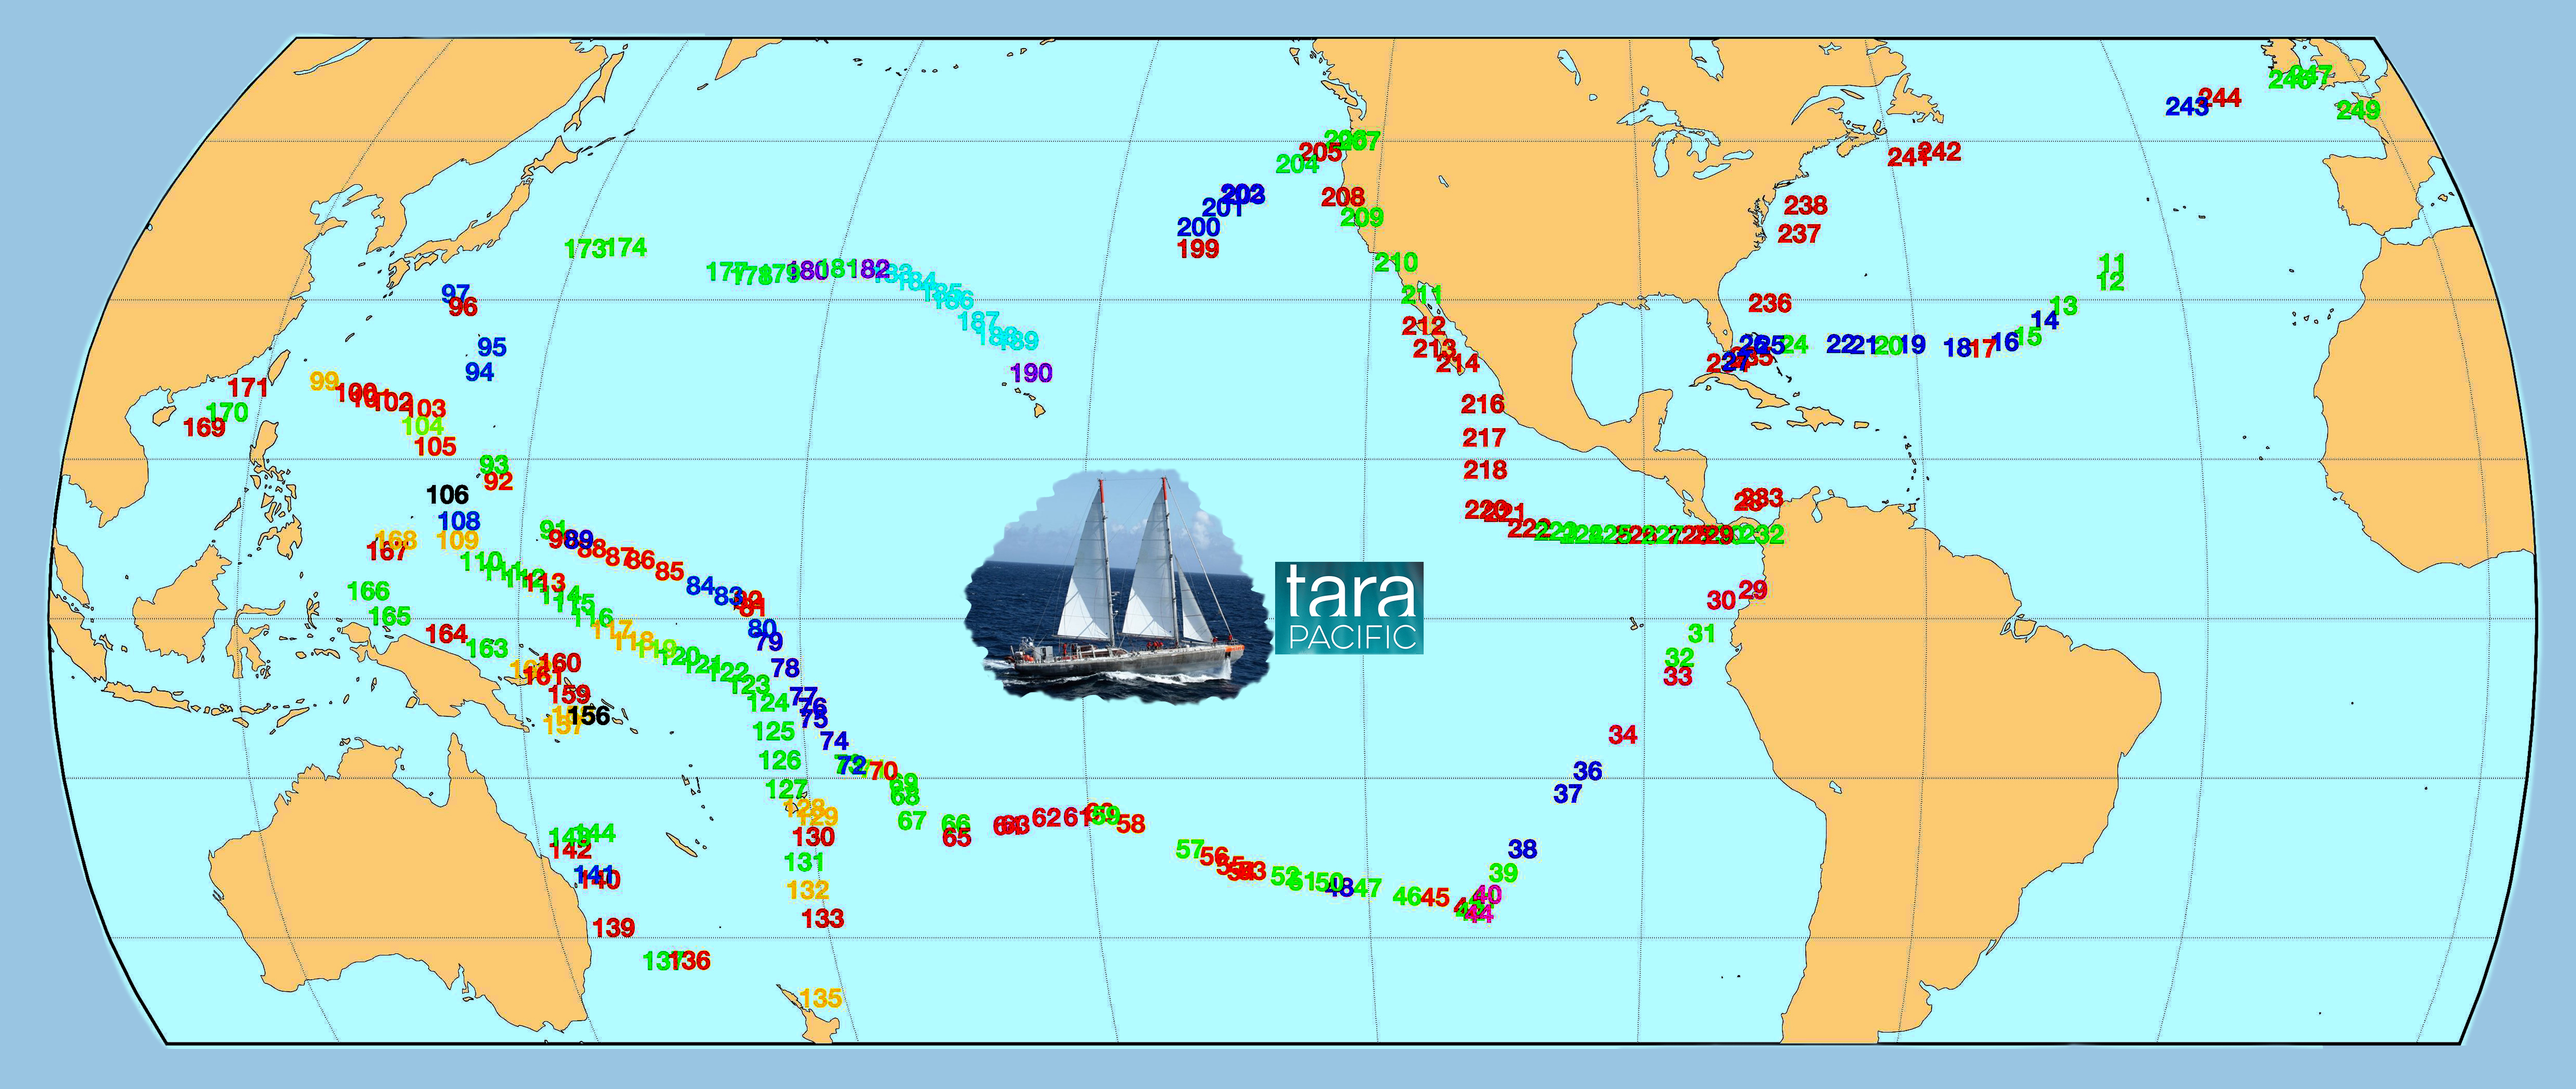 Tara Pacific Expedition Station Map